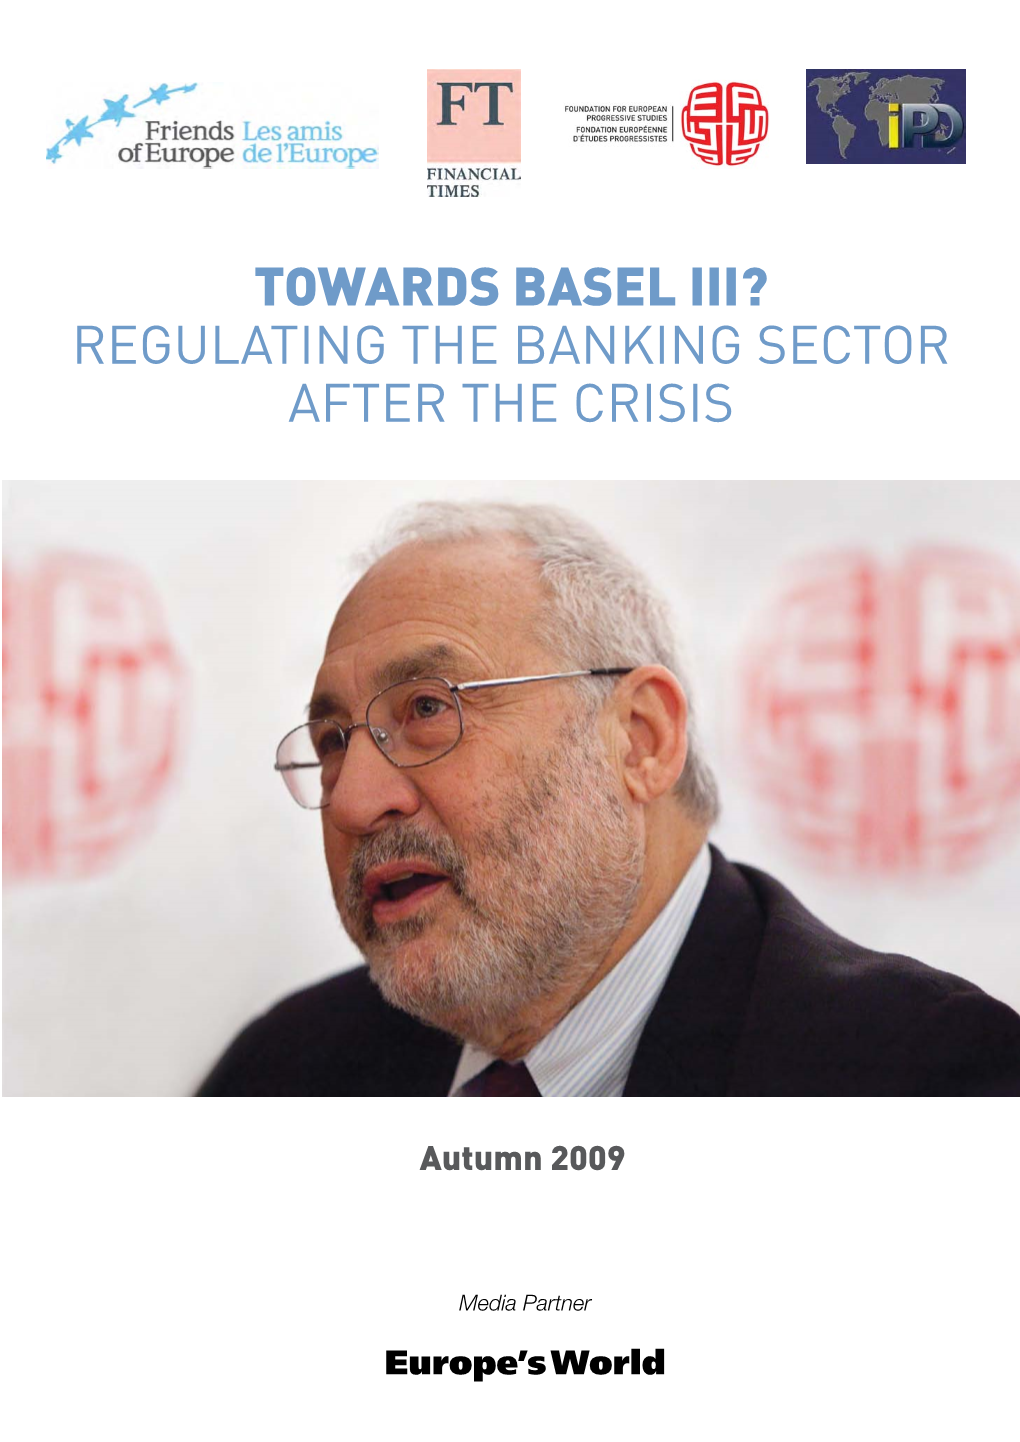 Towards Basel III? REGULATING the BANKING SECTOR AFTER the CRISIS